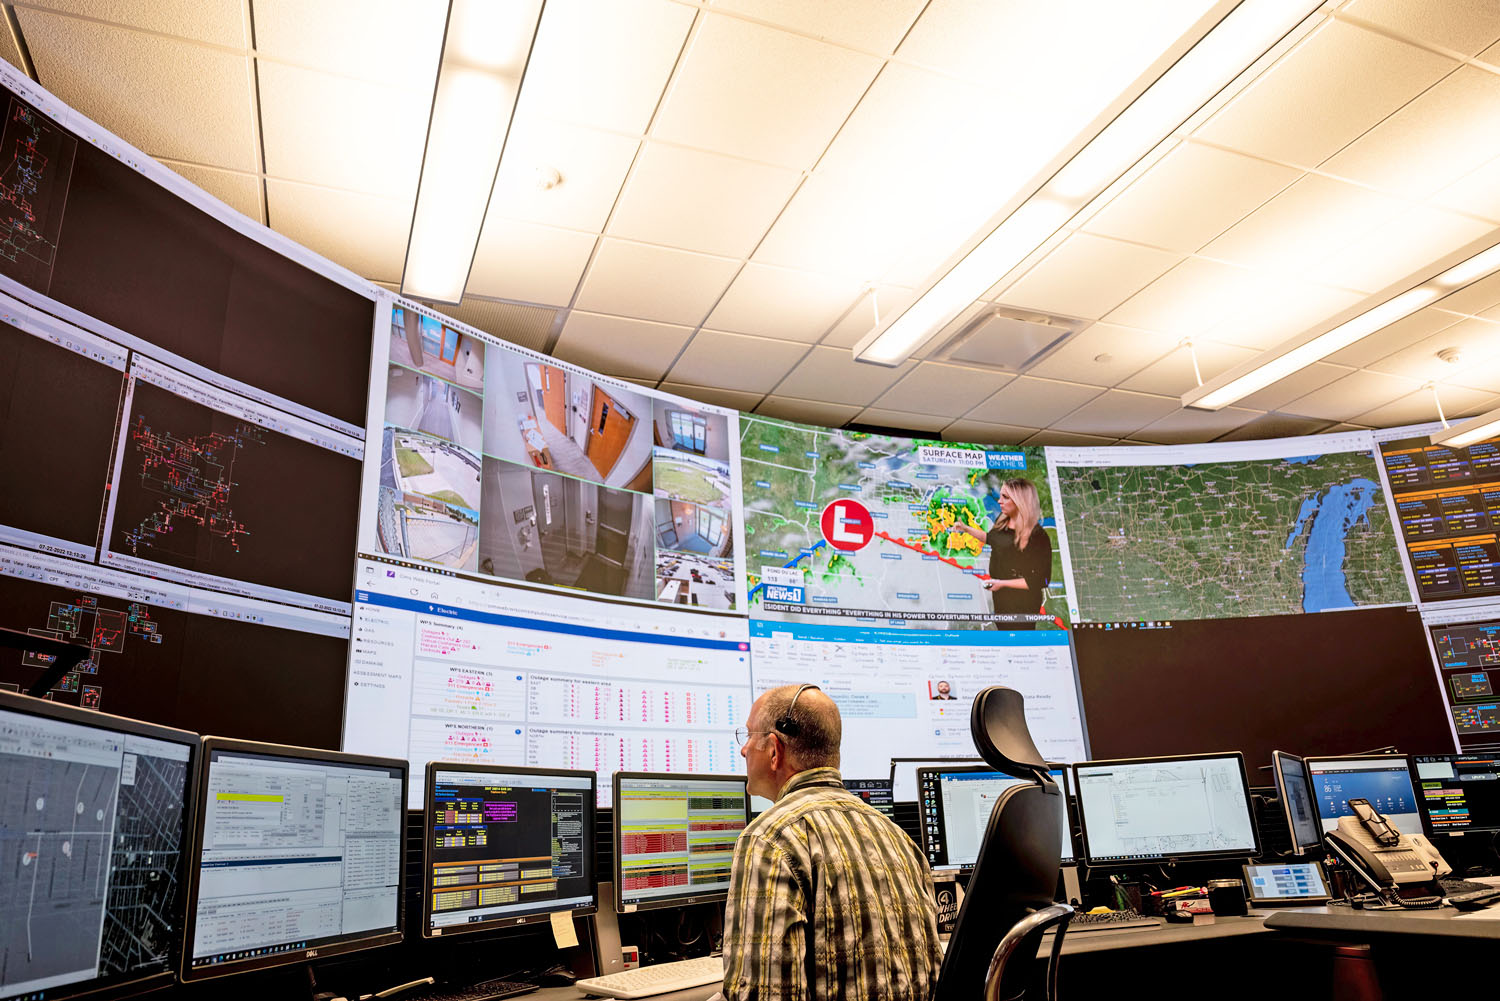 The operators in the Wisconsin Public Services, Electric Operations command center use a videowall to monitor and maintain the state's power grid.